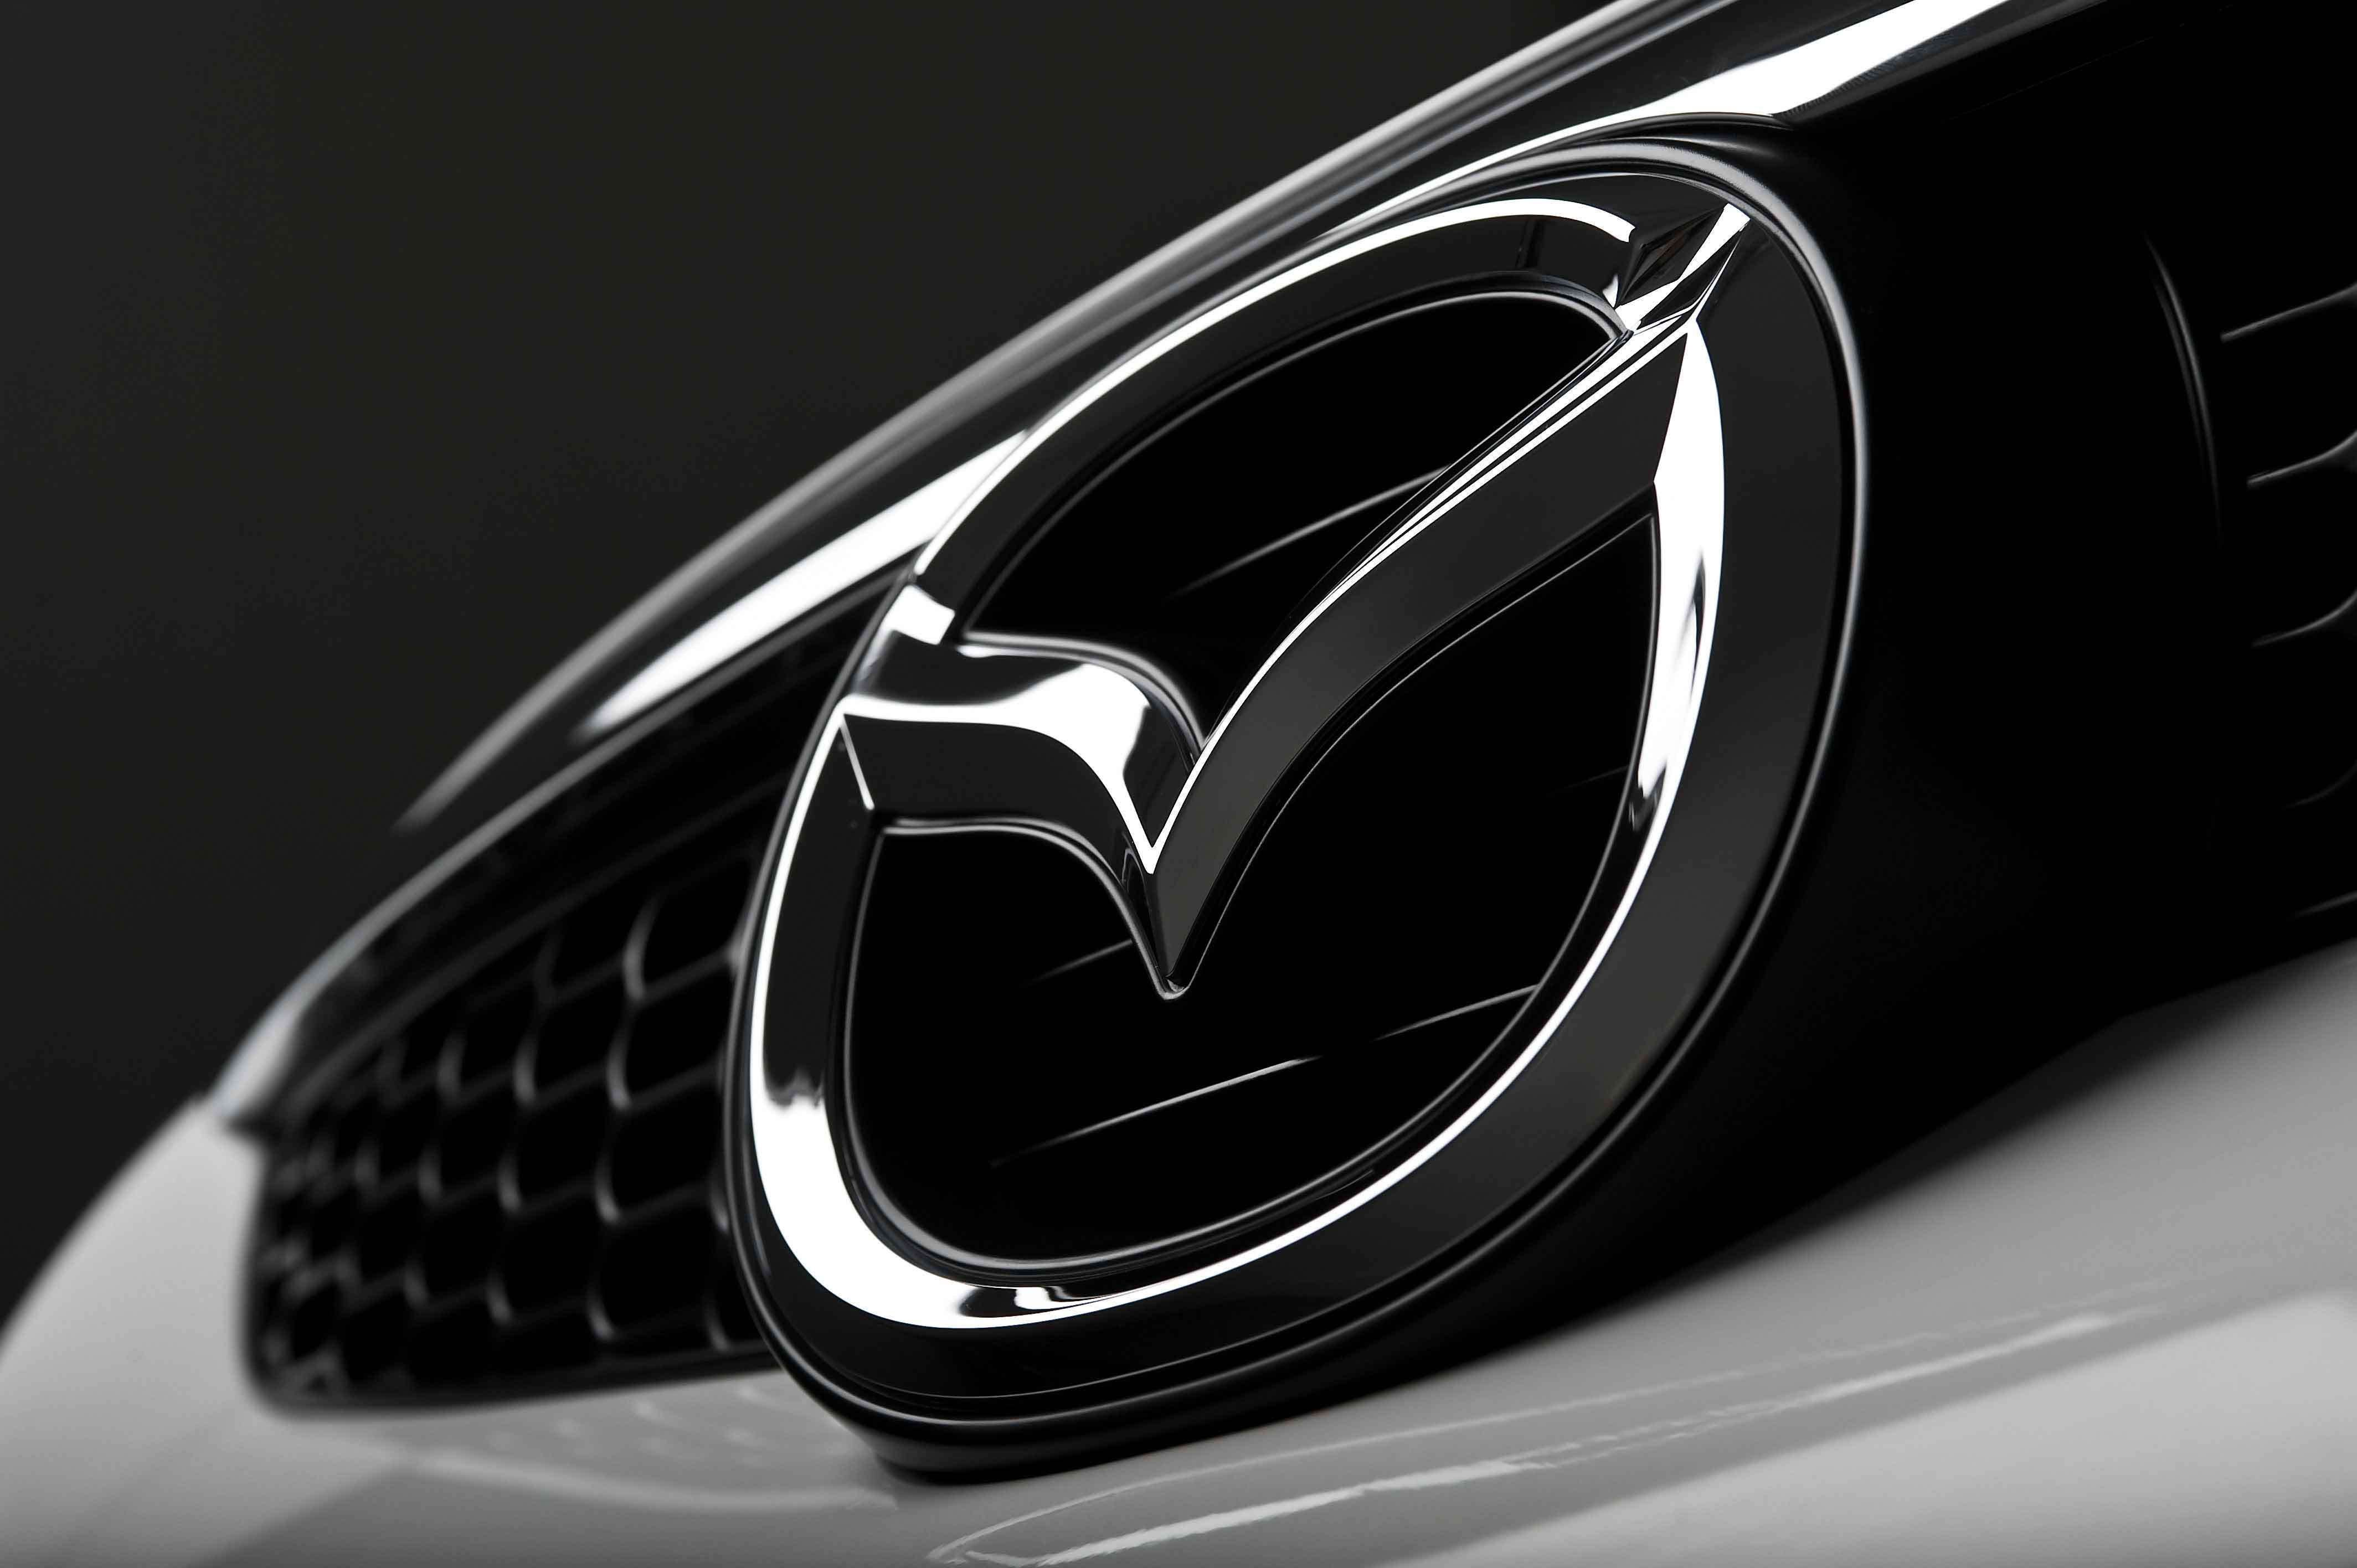 Mazda HD Wallpapers, Mazda Backgrounds, New Wallpapers